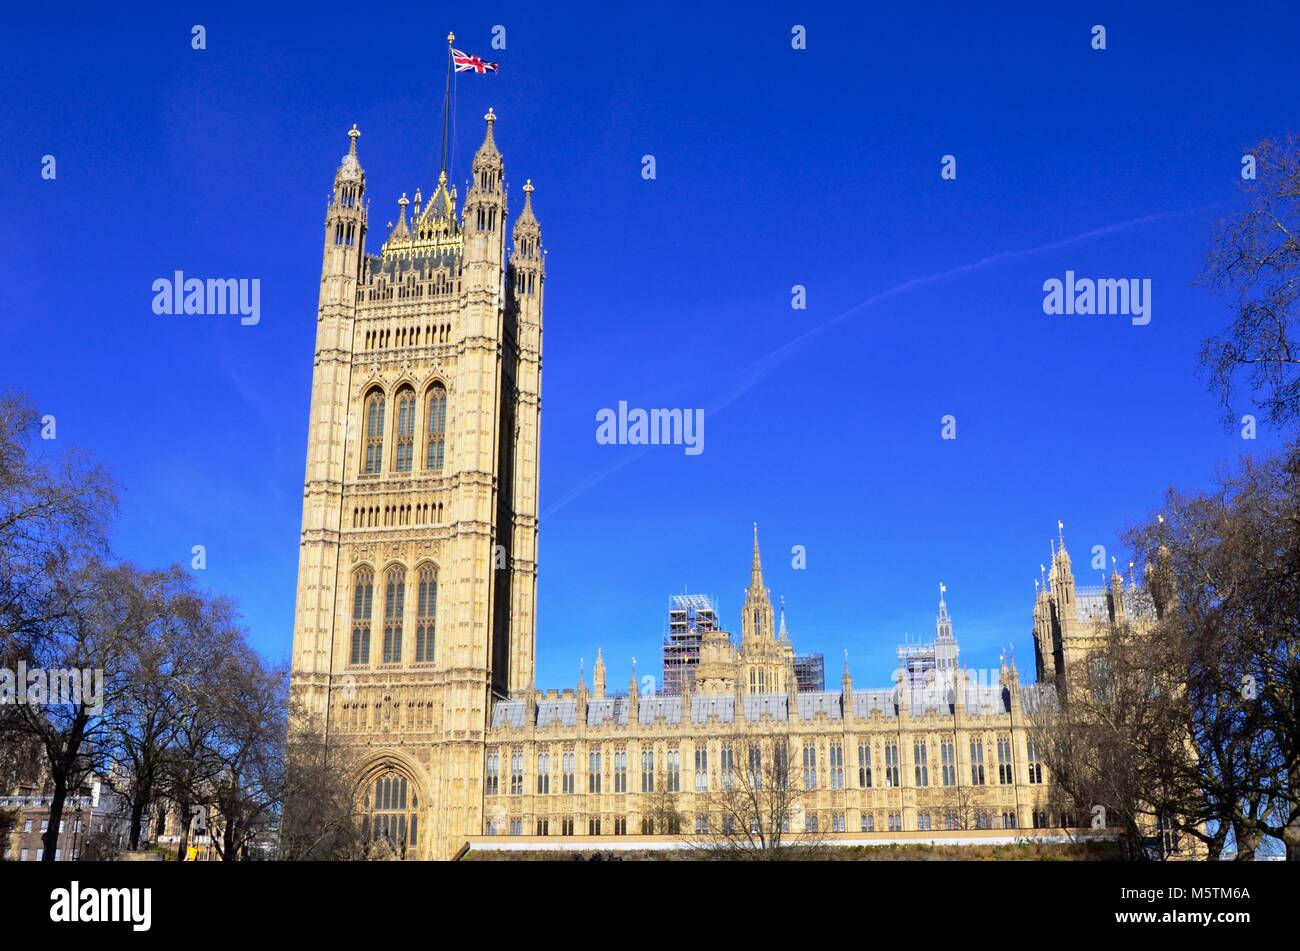 The Victoria Tower at the Houses of Parliament, London, England Stock Photo